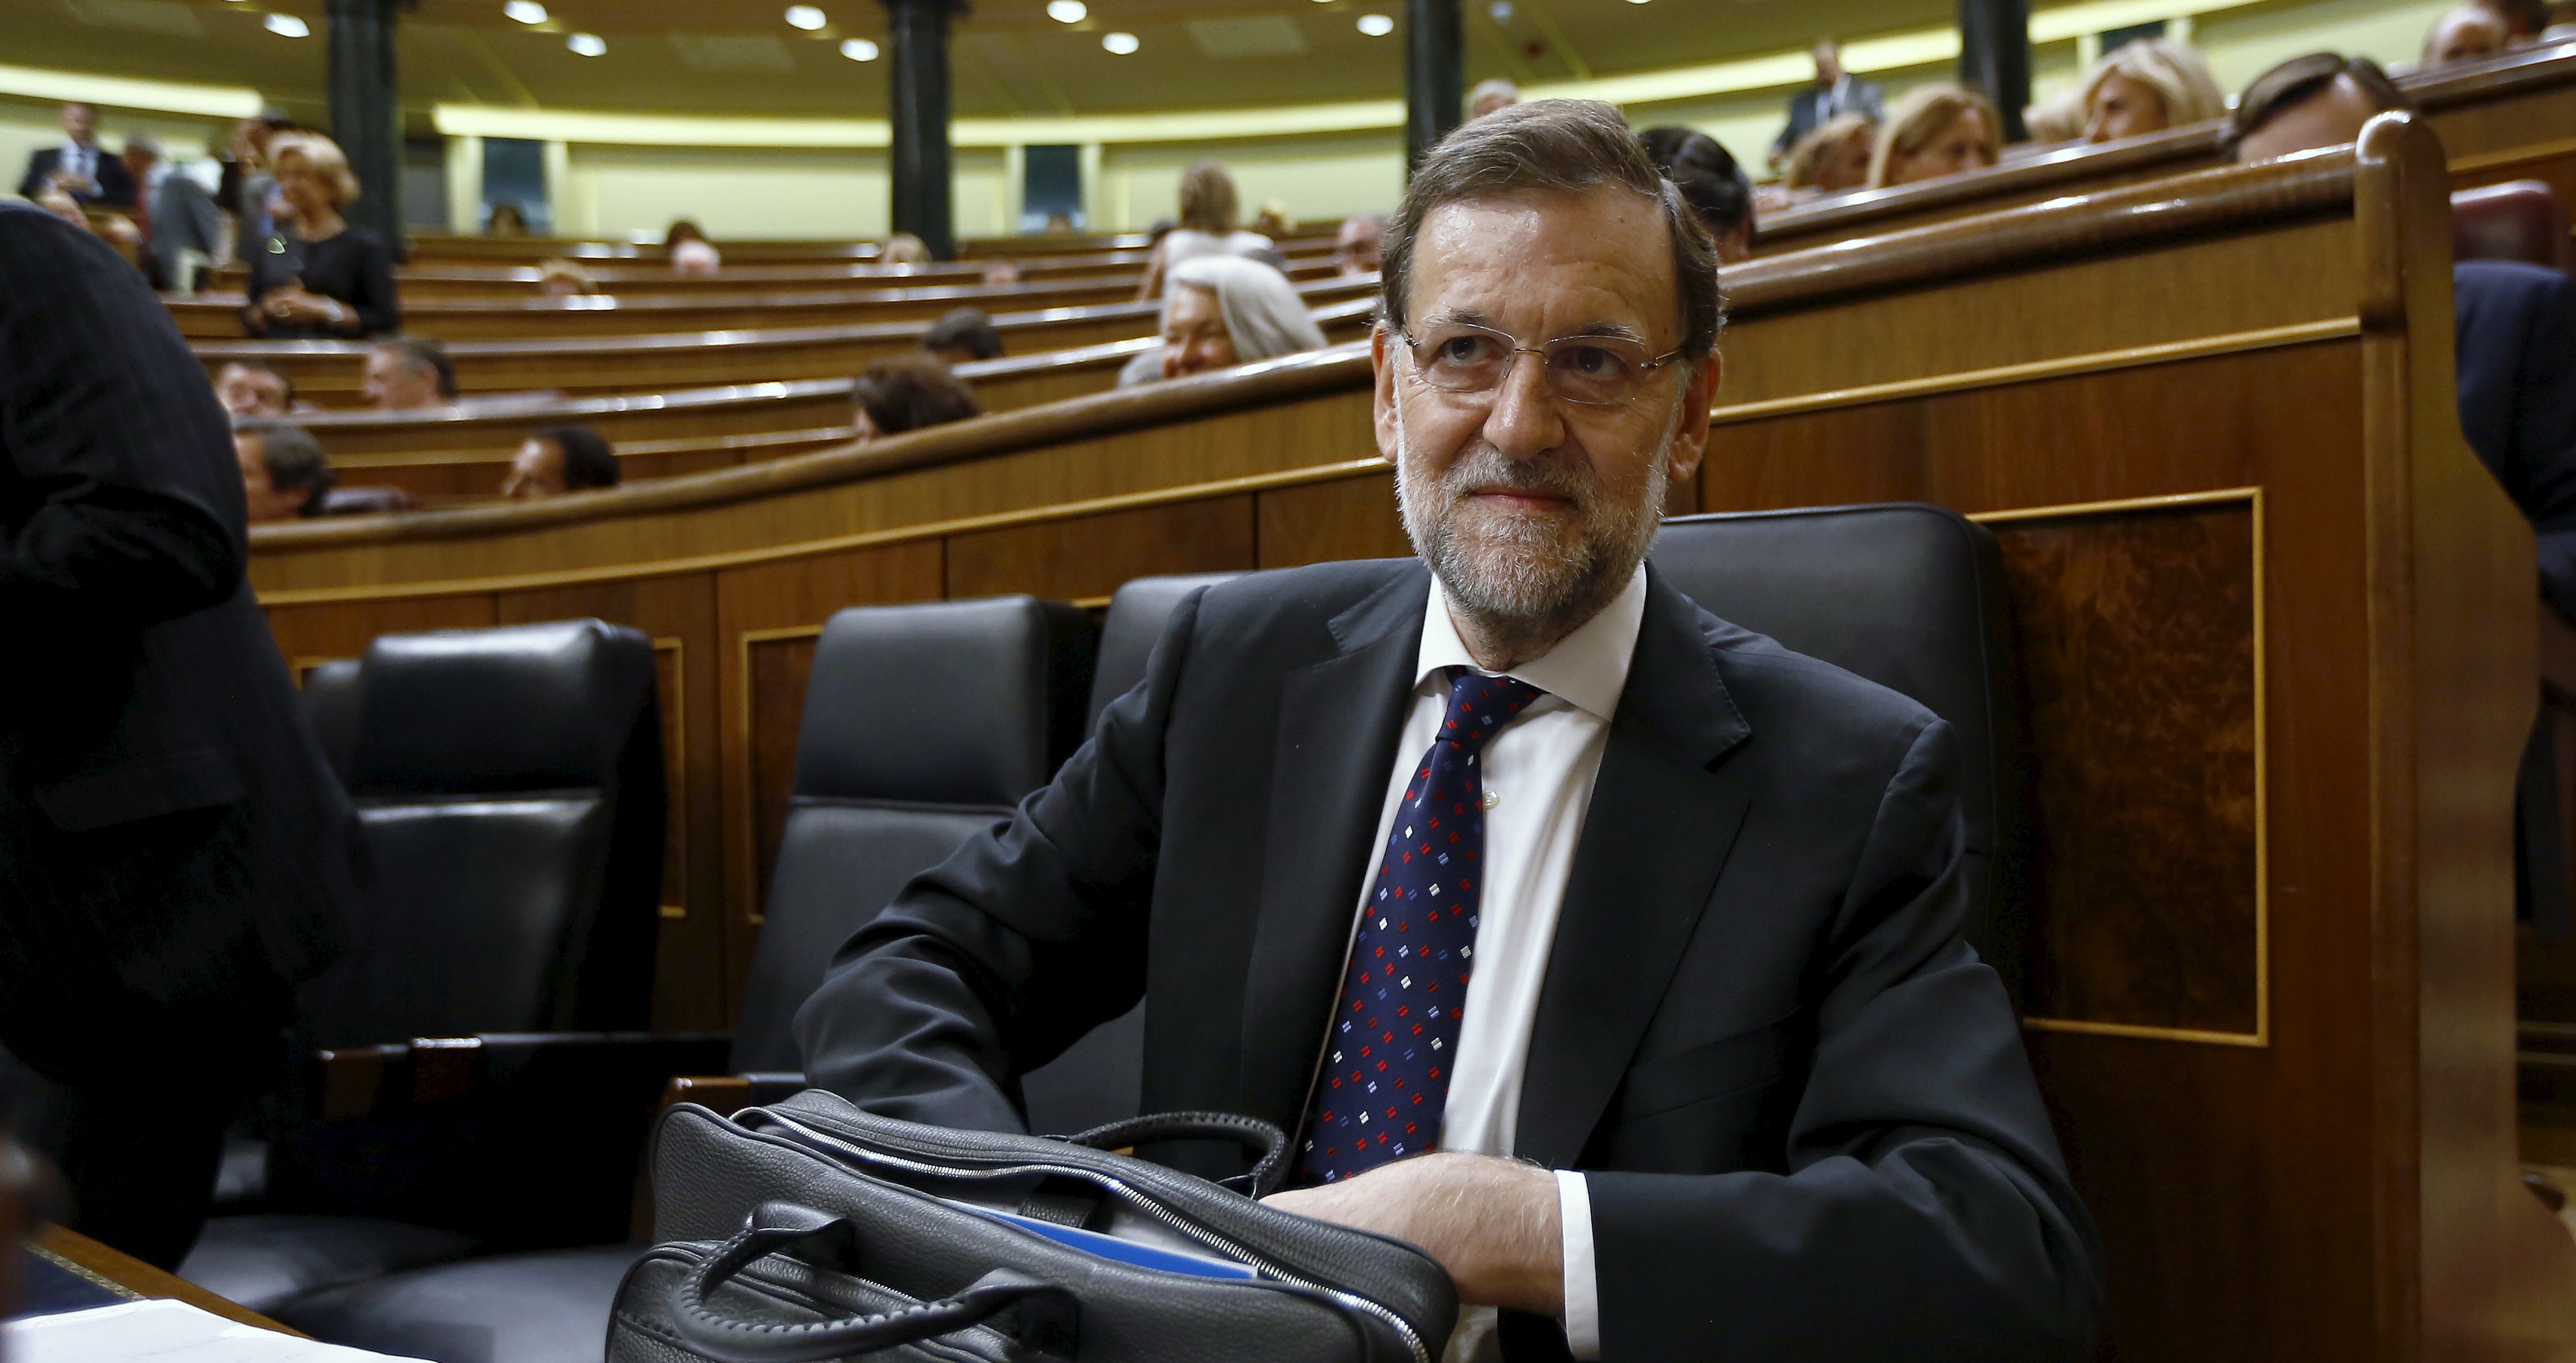 Spanish Prime Minister Mariano Rajoy takes his seat at the start of a parliamentary session in Madrid, Spain, July 15, 2015. Rajoy said he will put forward the details of a third Greek bailout to parliament for debate and ask for its approval.   REUTERS/Paul Hanna
               - RTX1KD5X